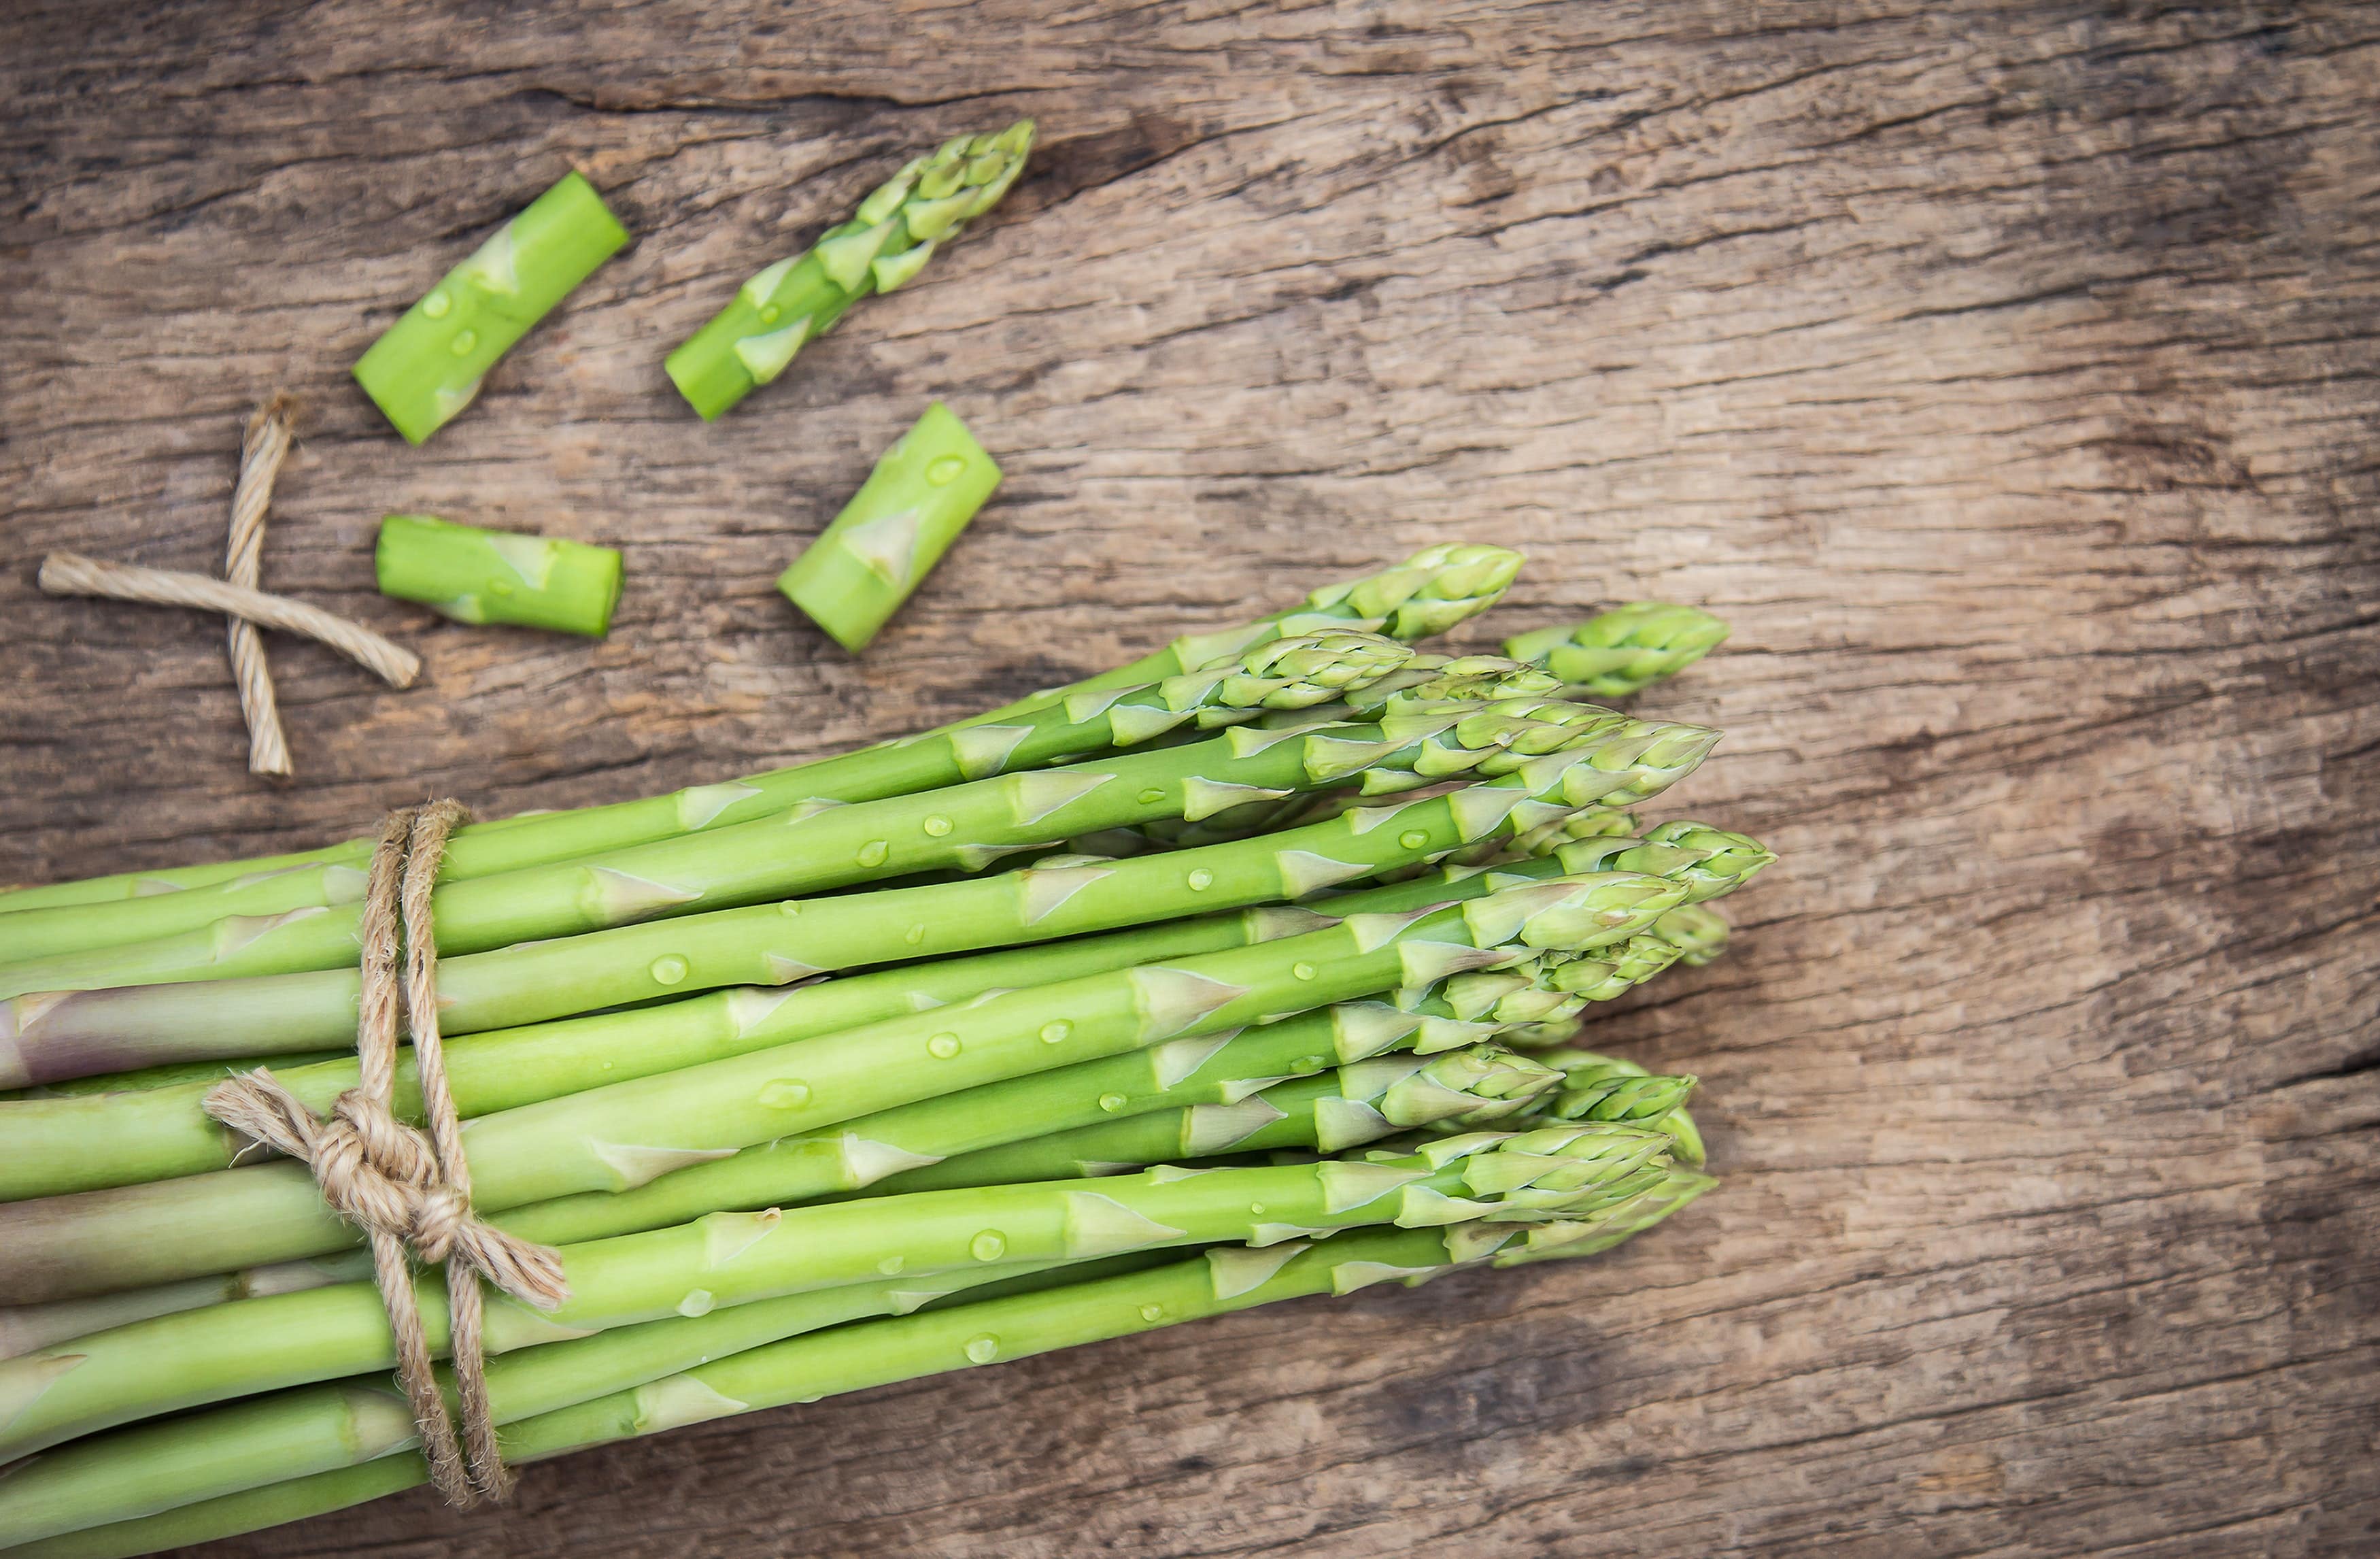 bunch-of-asparagus-tied-with-string-on-a-wooden-surface